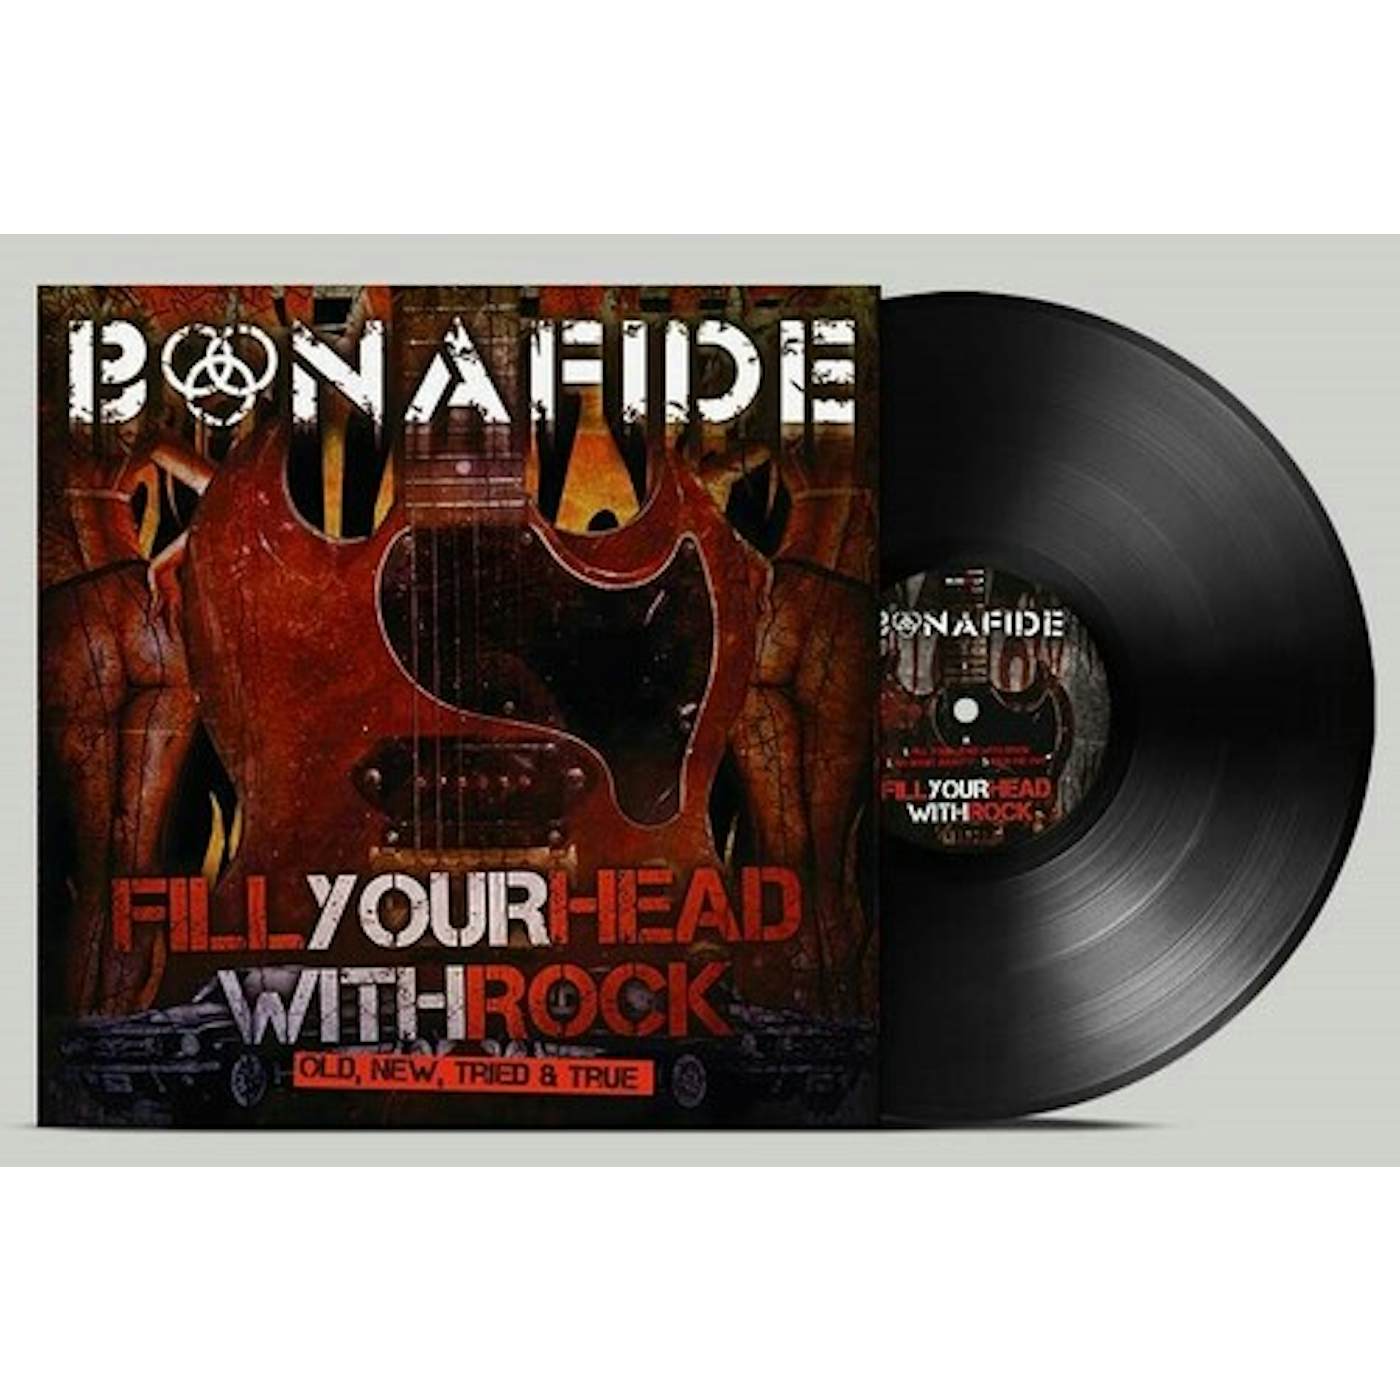 Bonafide FILL YOUR HEAD WITH ROCK - OLD NEW TRIED & TRUE Vinyl Record